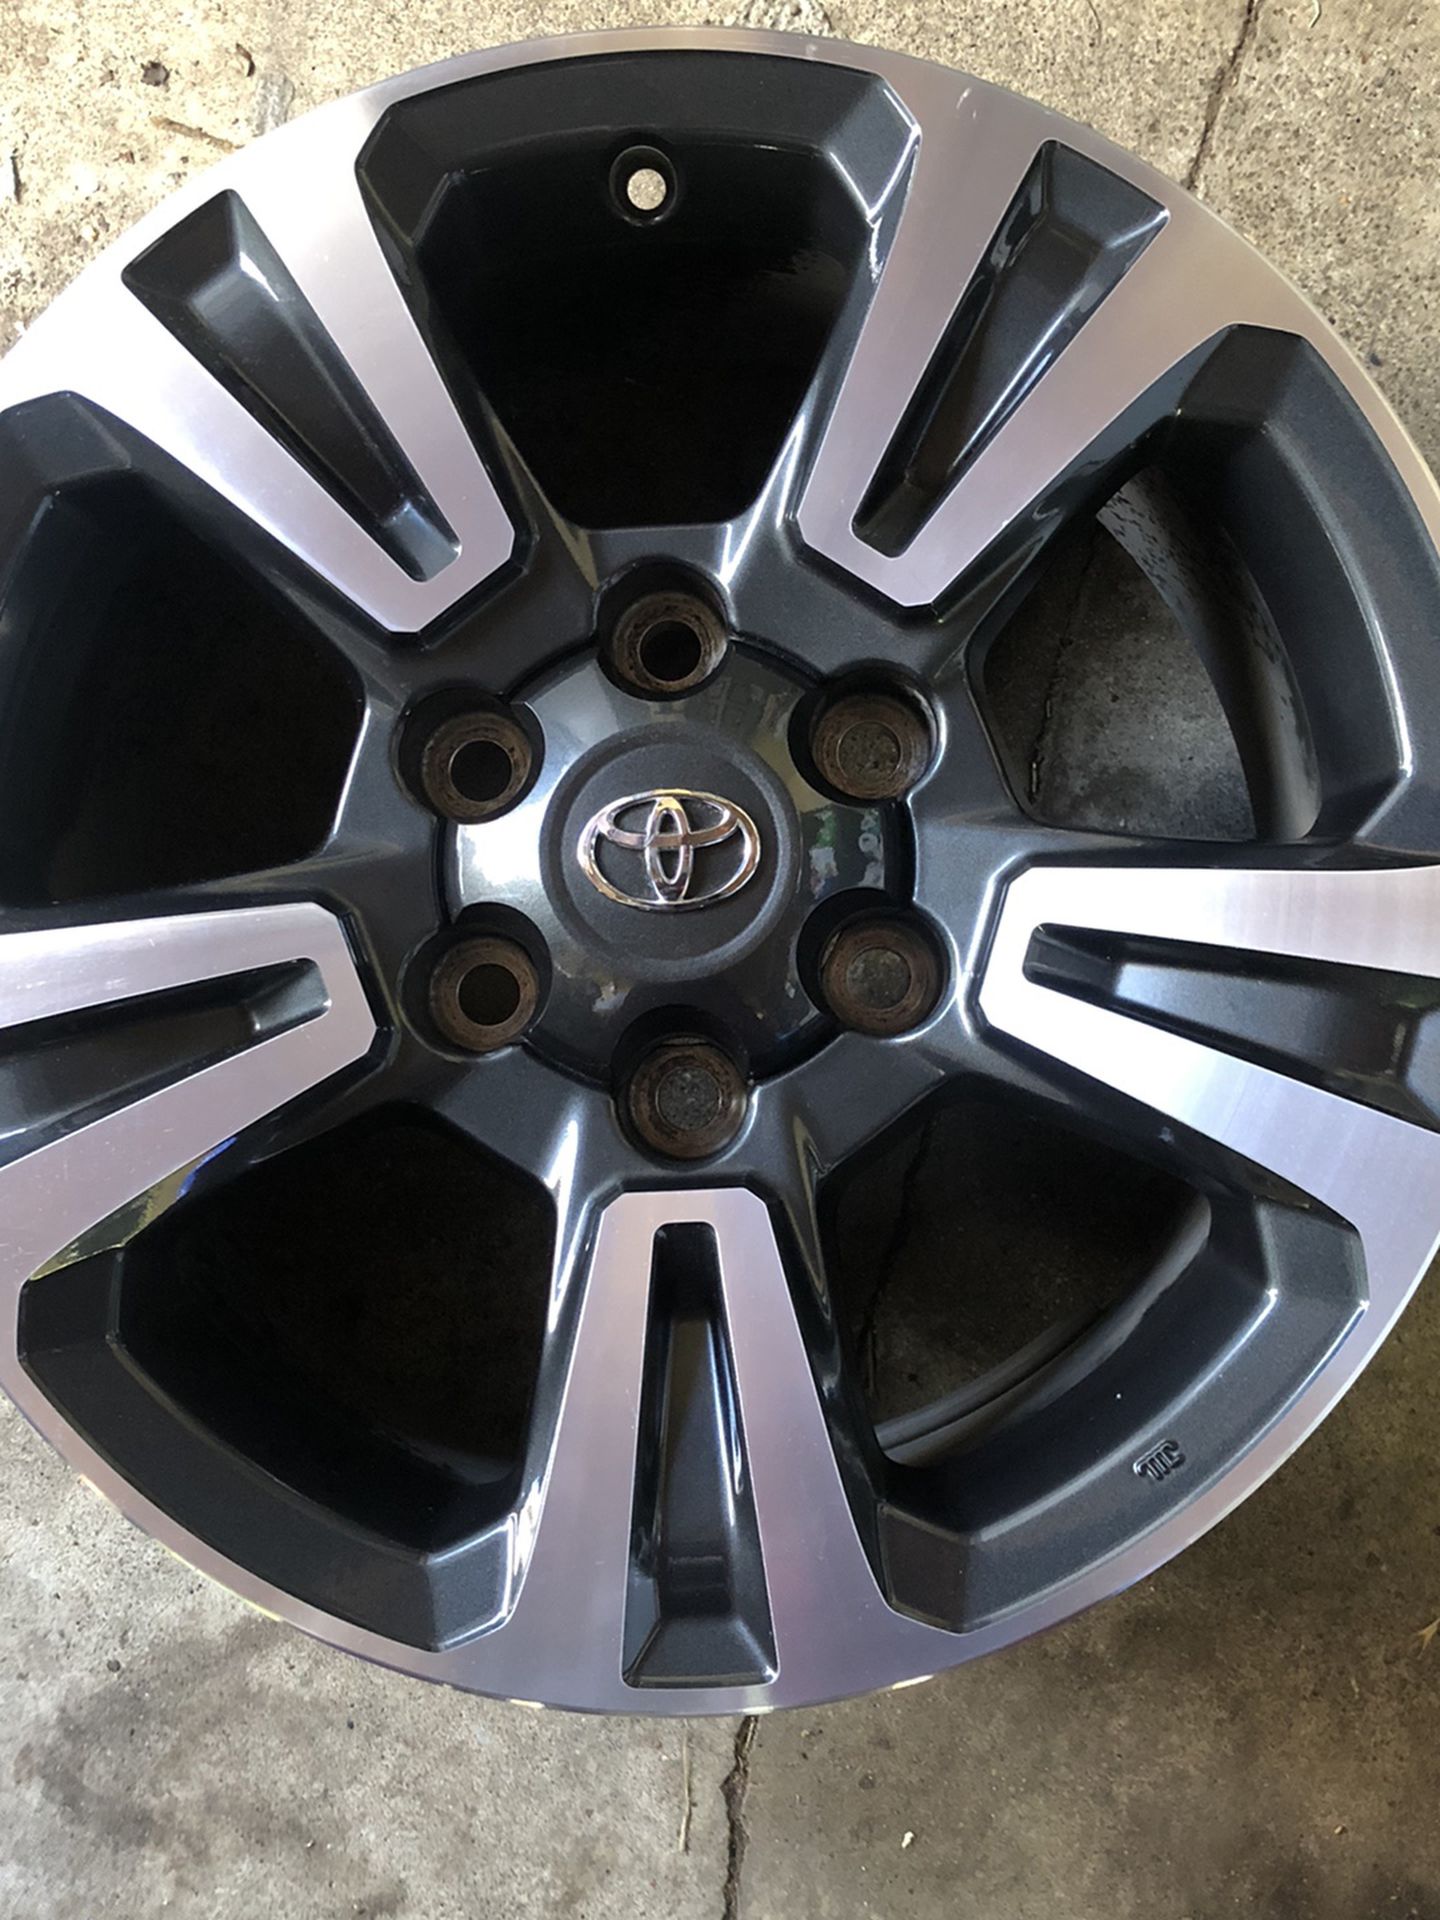 4 RIMS TOYOTA TRD STOCK SIZE 17  THEY FIT TACOMA SEQUOIA 4RUNNER GREAT CONDITION AND GREAT SHAPE 6 LUGS 